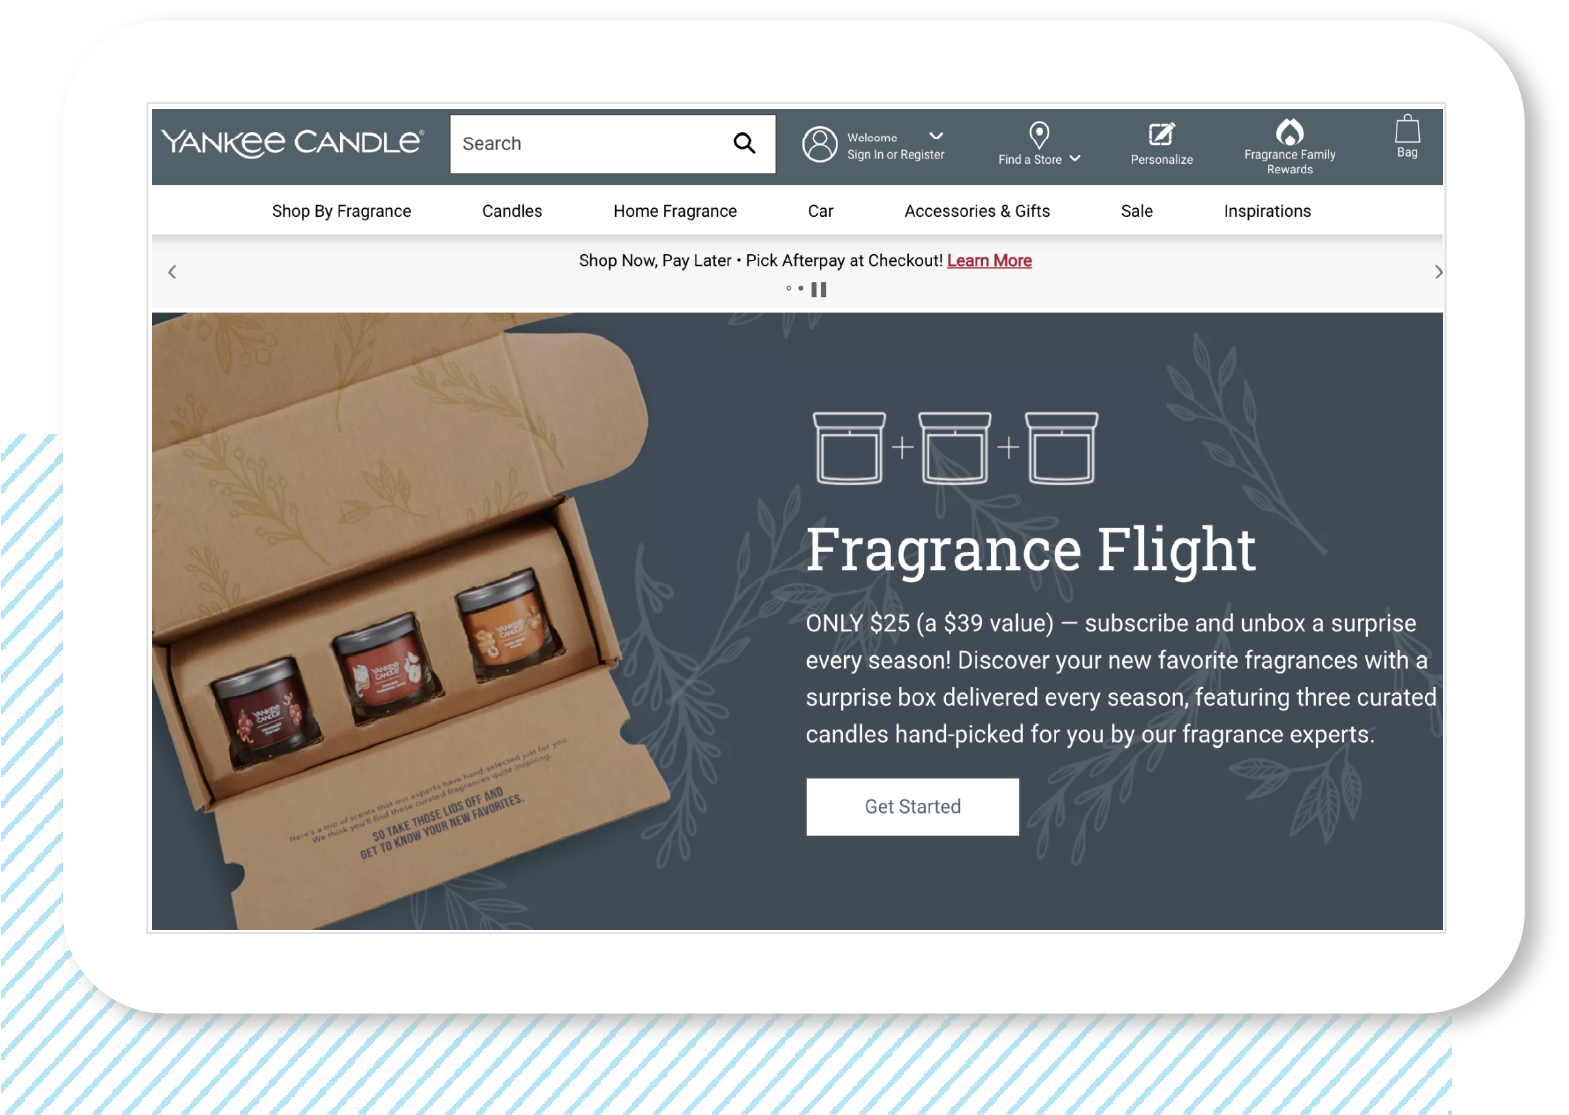 Yankee Candle's Fragrance Flight is an example of a subscription program name.